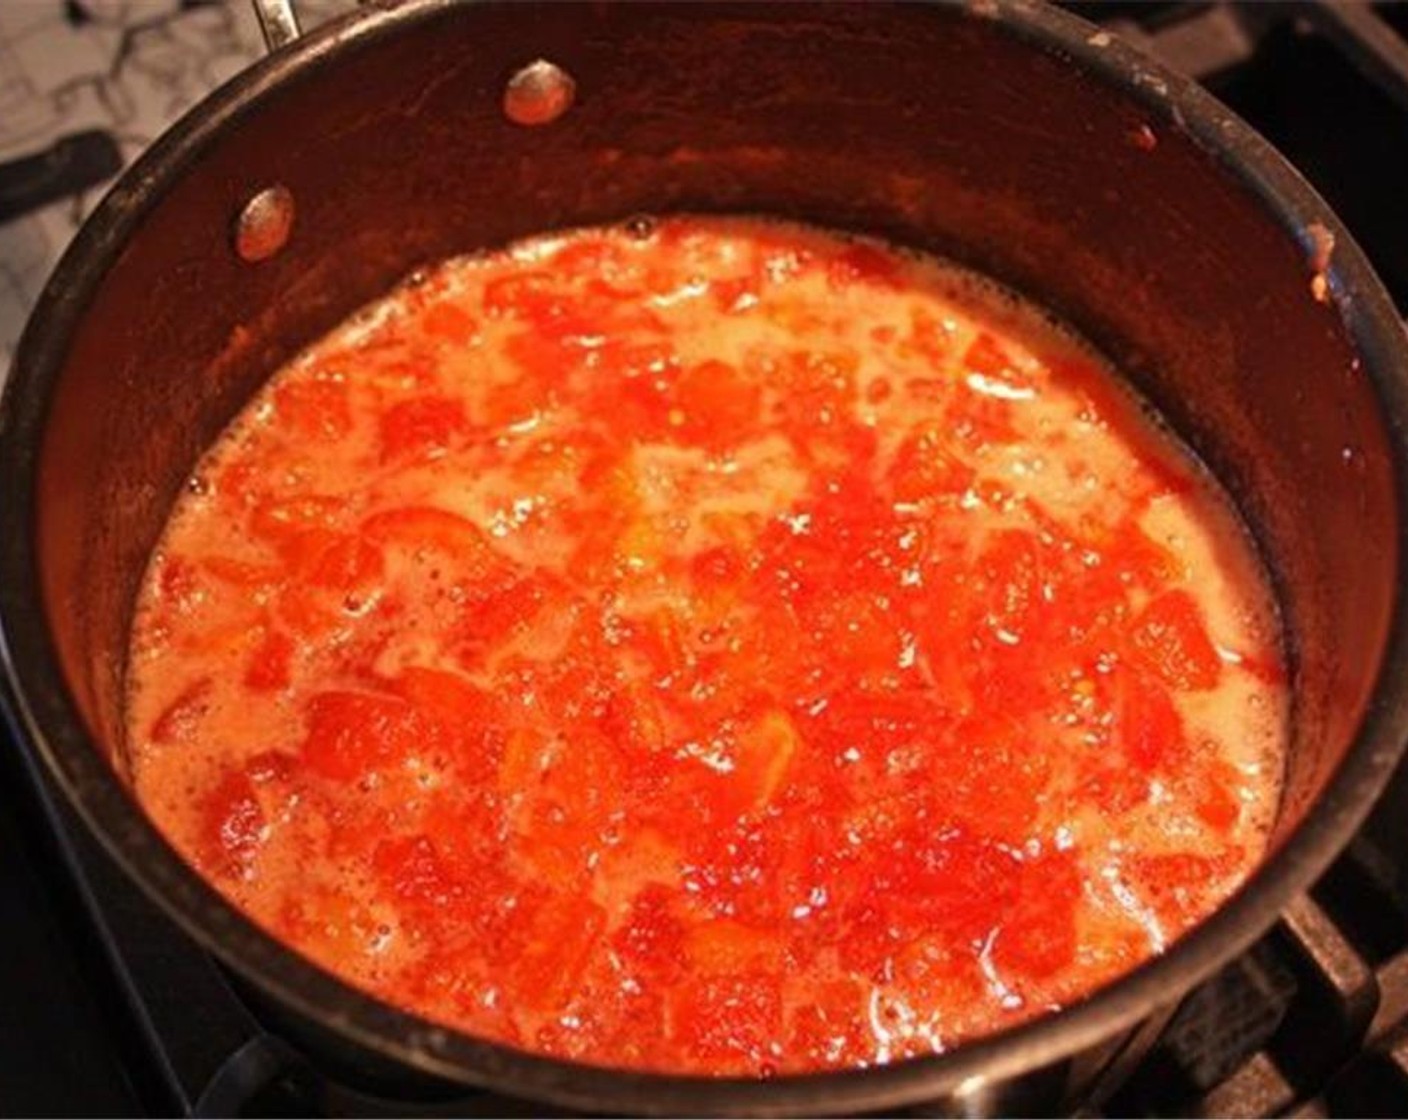 step 7 Roughly chop the tomatoes and put them into a pot along with Granulated Sugar (1 cup), the juice from Lemons (1 1/4) and Cinnamon Stick (1). Bring to a boil for a few minutes. Then reduce heat to medium-low.